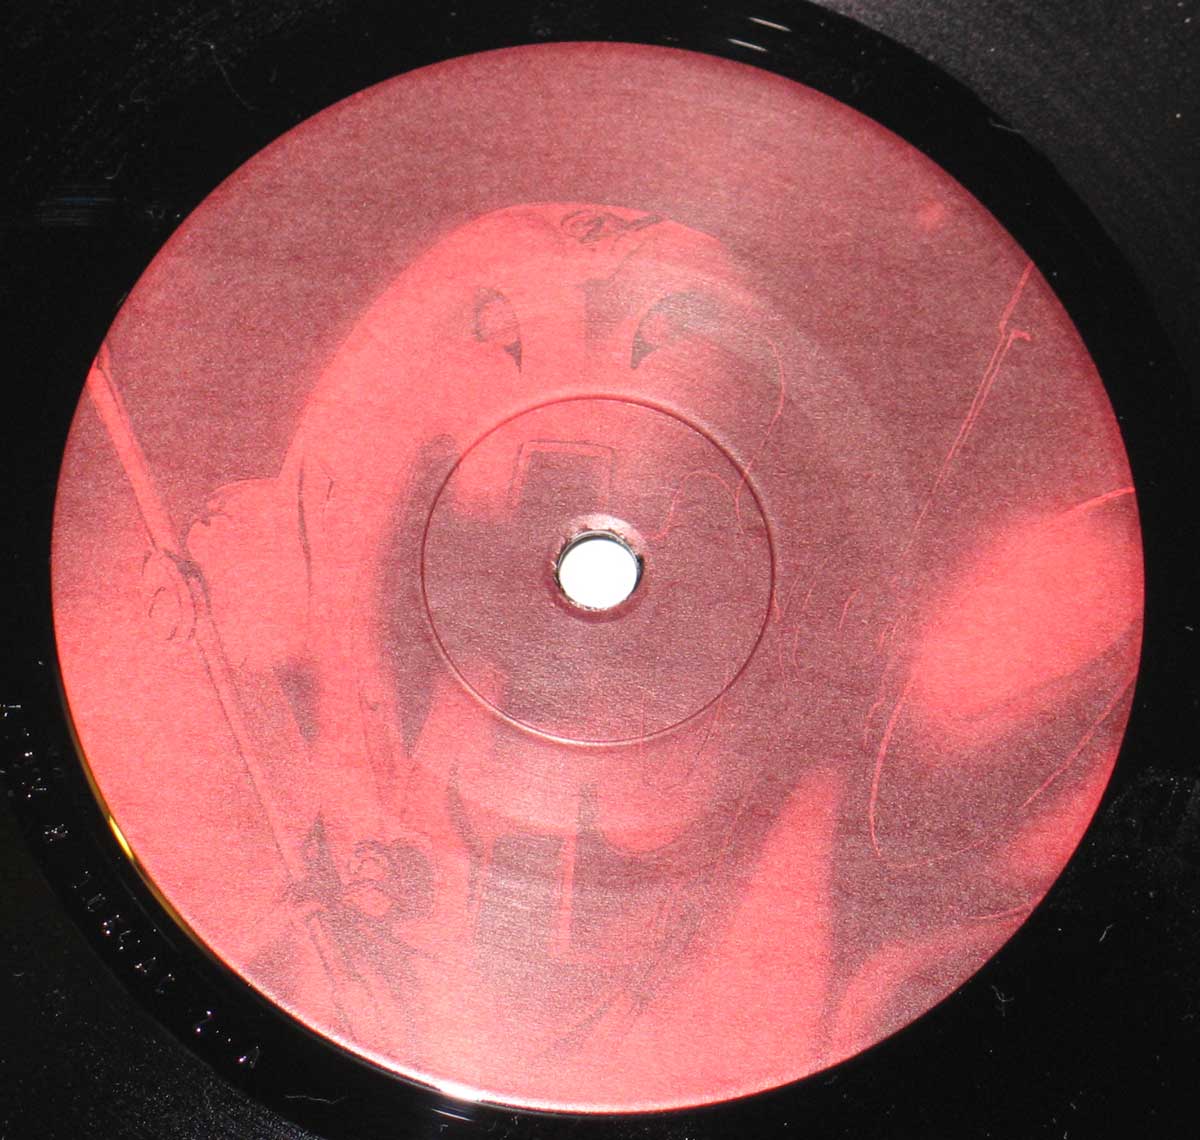 Enlarged High Resolution Photo of the Record's label Accuser - Experimental Errors https://vinyl-records.nl